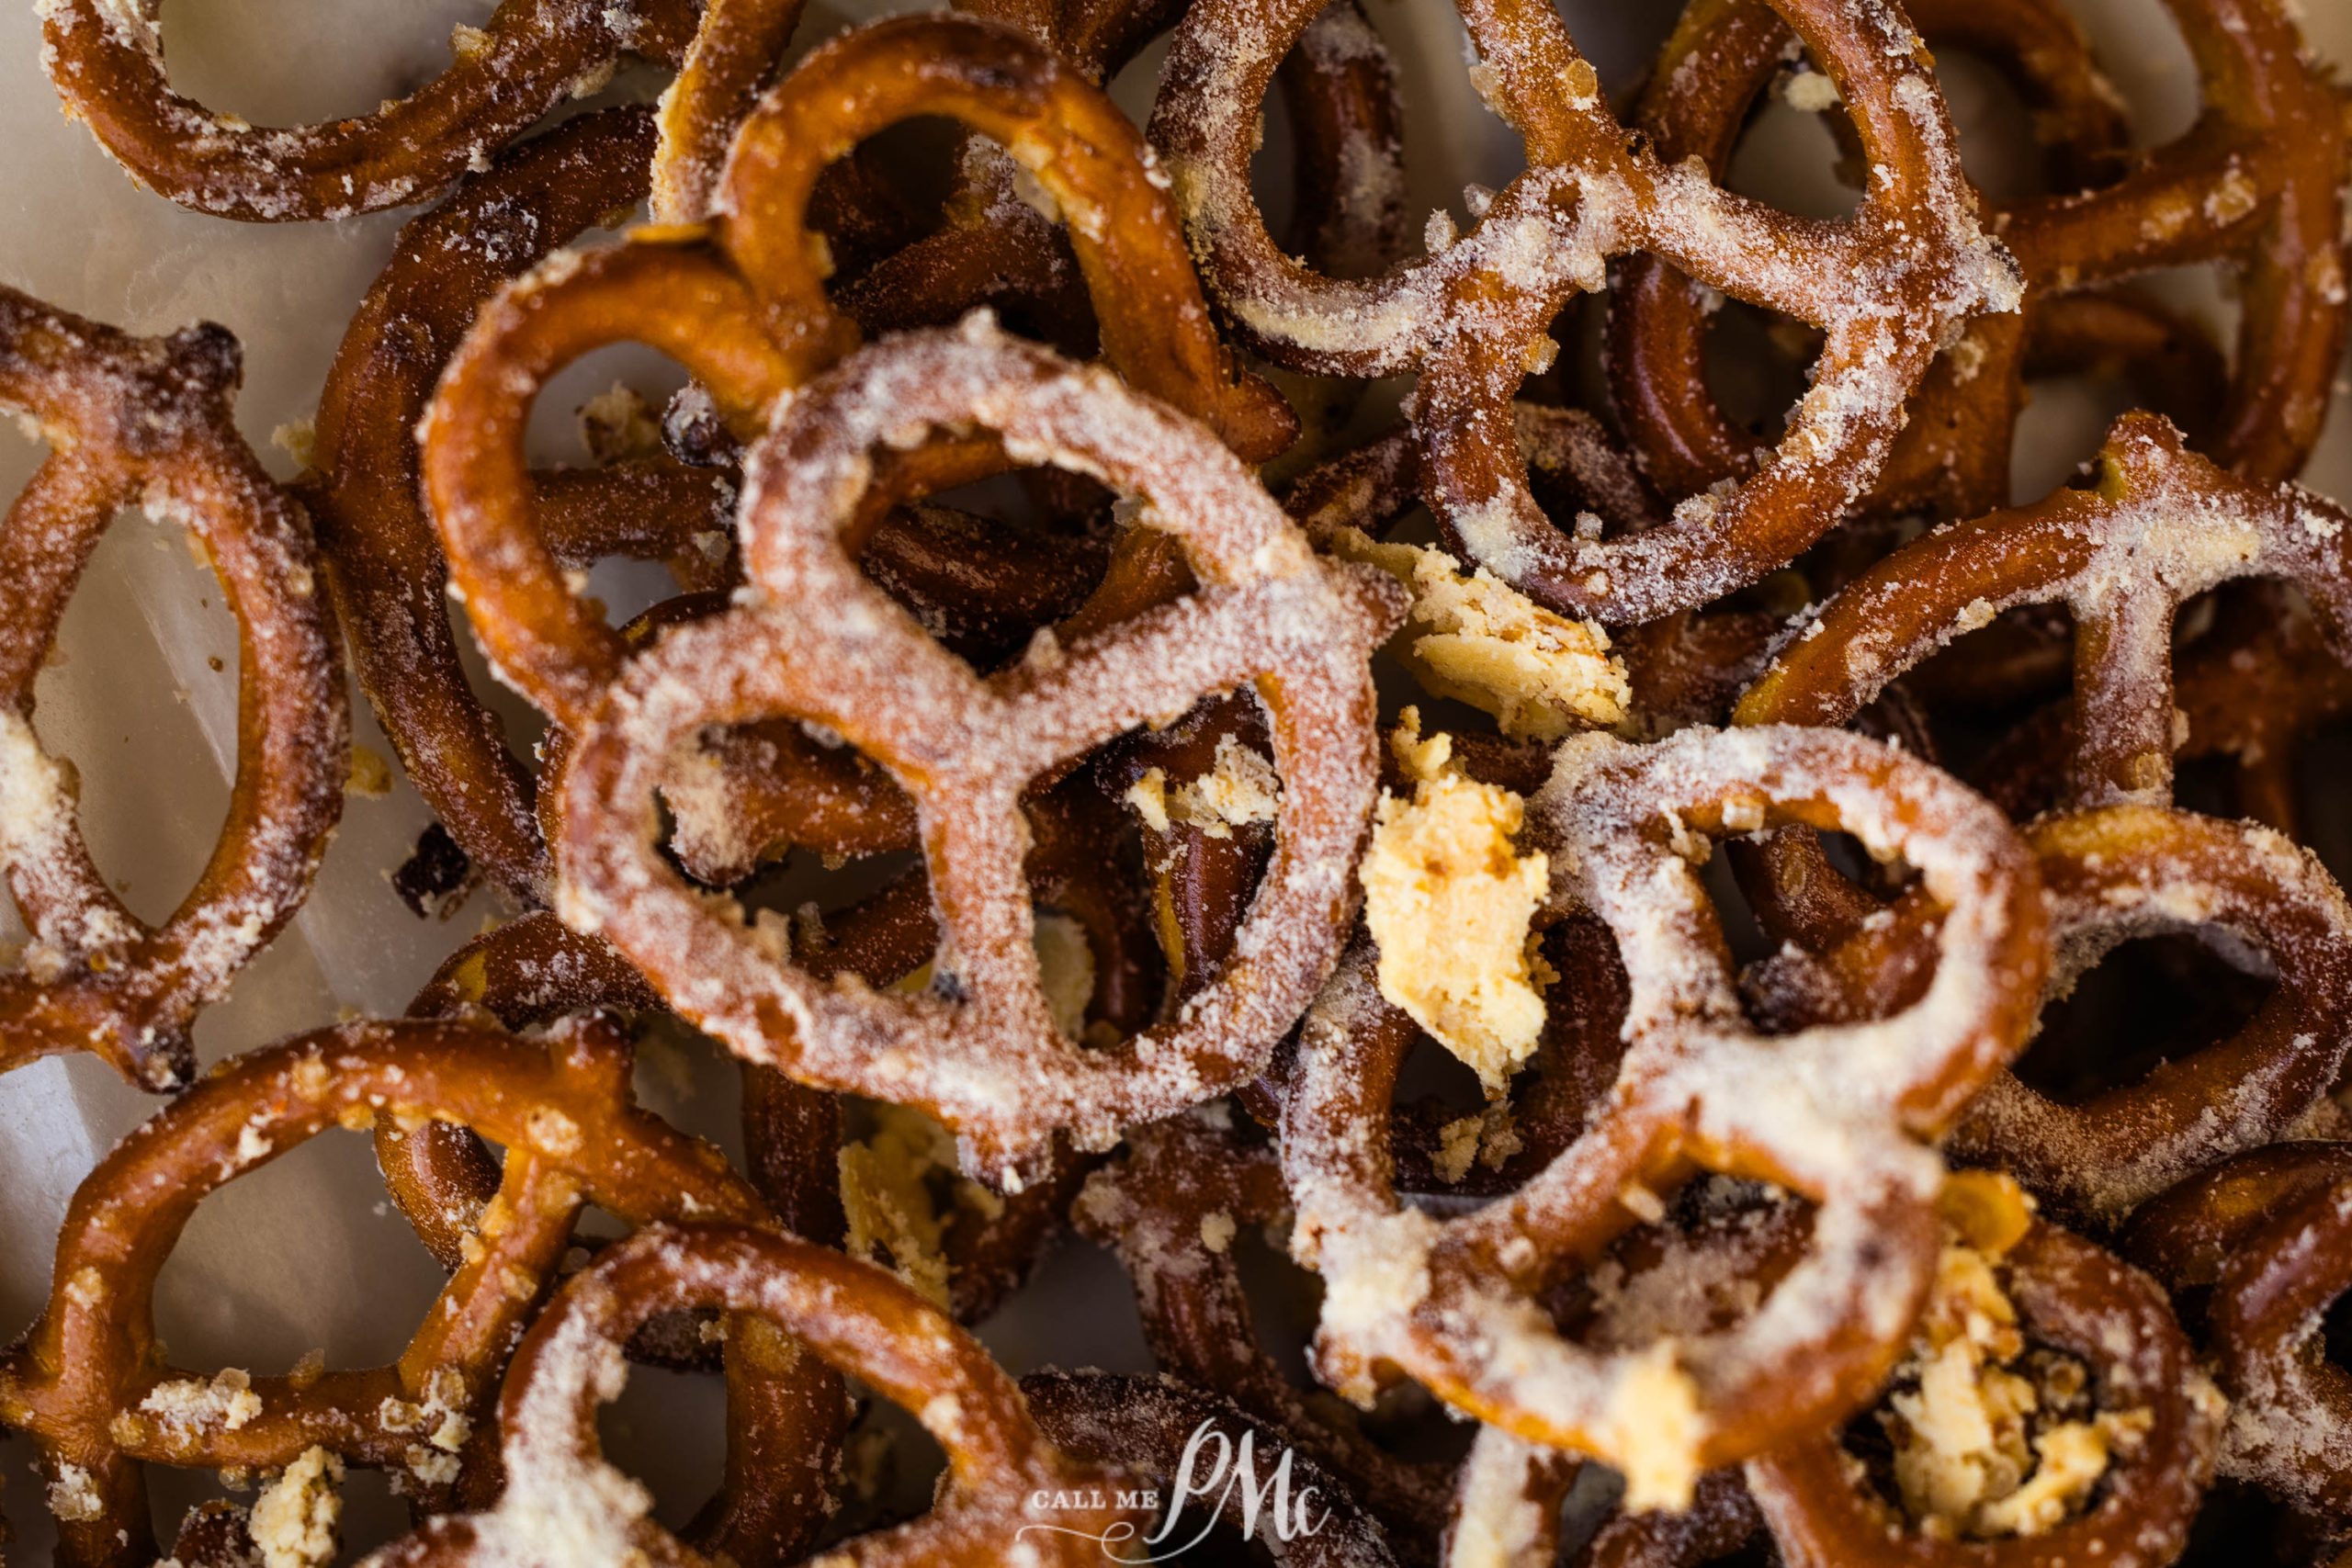 A pile of pretzels on a white plate.